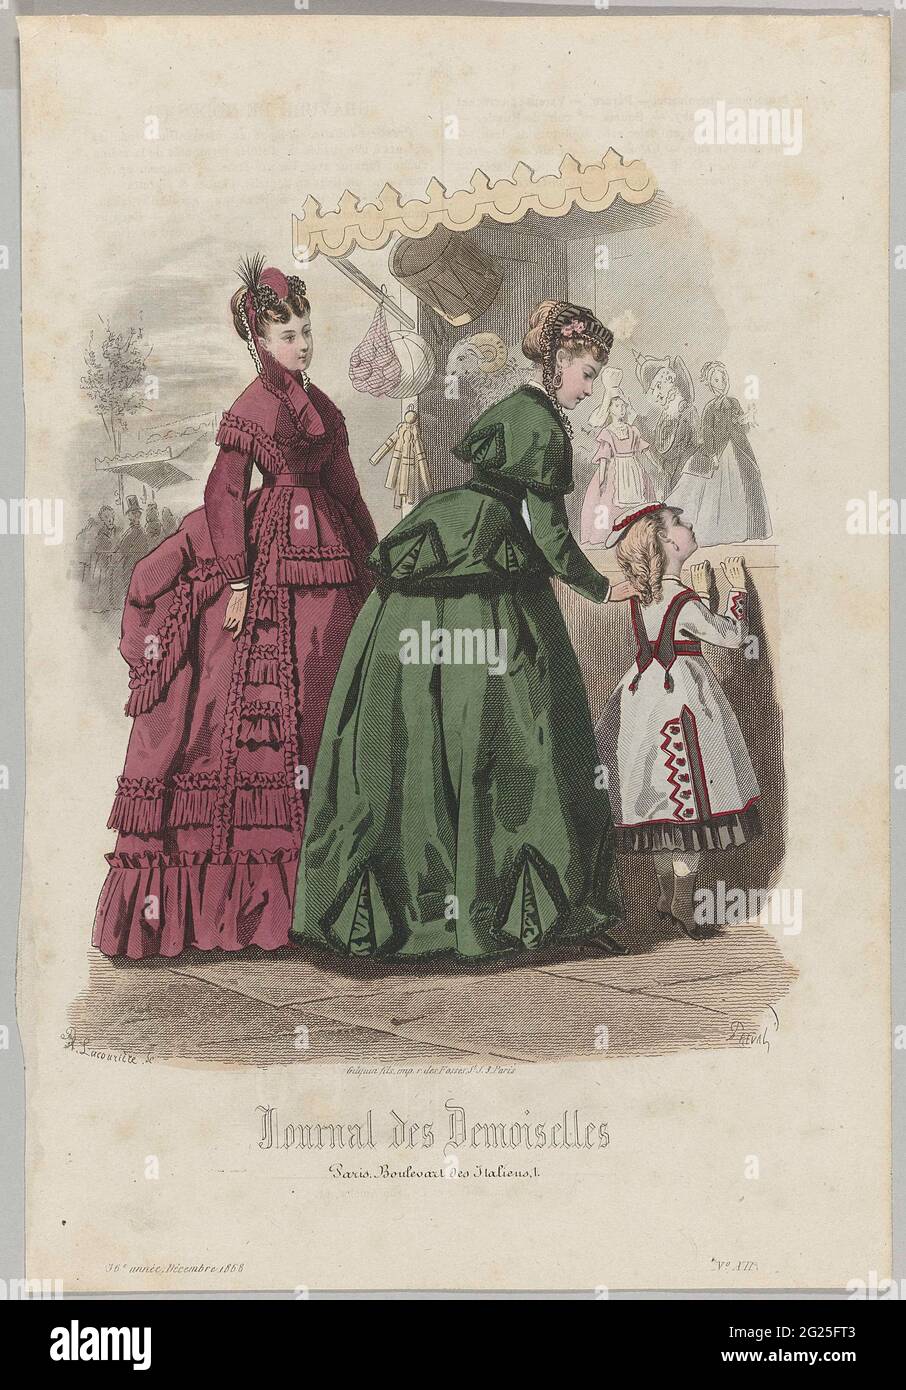 Journal des Demoiselles, Décembre 1868, 36th Année, No. 12. Two women and a girl are looking at a puppet room. The women are dressed in dresses with queue. The girl wears a dress to over the knee with boots up to the ankle. Print from the Mode magazine Journal des Demoiselles (1833 -1922). Stock Photo